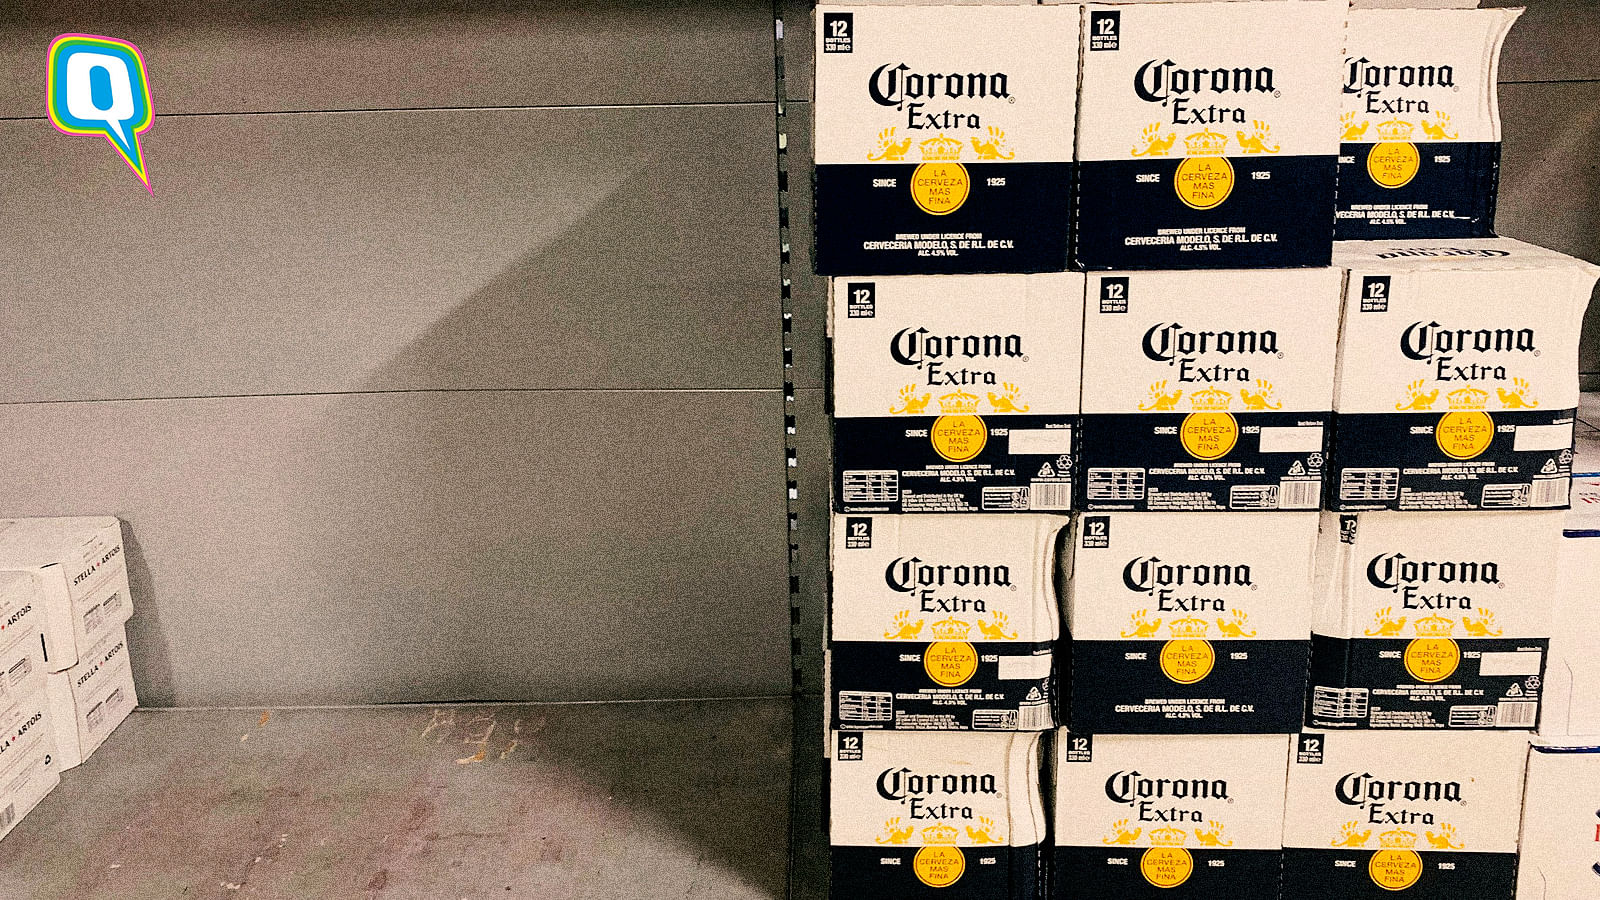 Corona beer stops production in Mexico